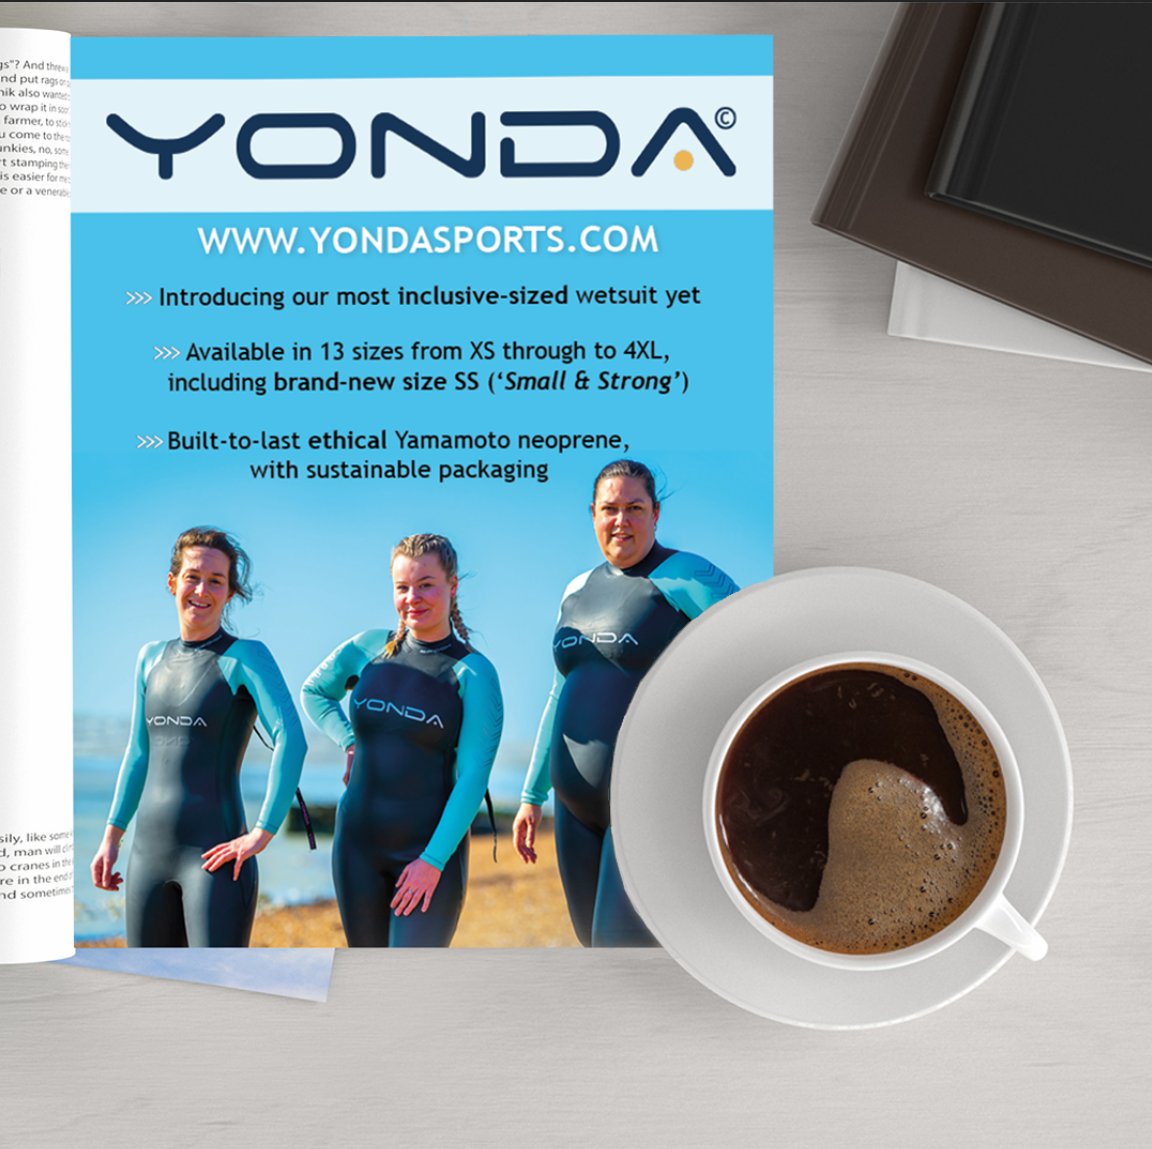 Have you spotted us in Outdoor Swimmer Magazine? This month, we feature our most #inclusive #wetsuit yet. The Spook provides ultimate flexibility & comfort during your swim. Have you tried it yet? Subscribe to get the latest copy & stay up to date with the latest swimmer news.